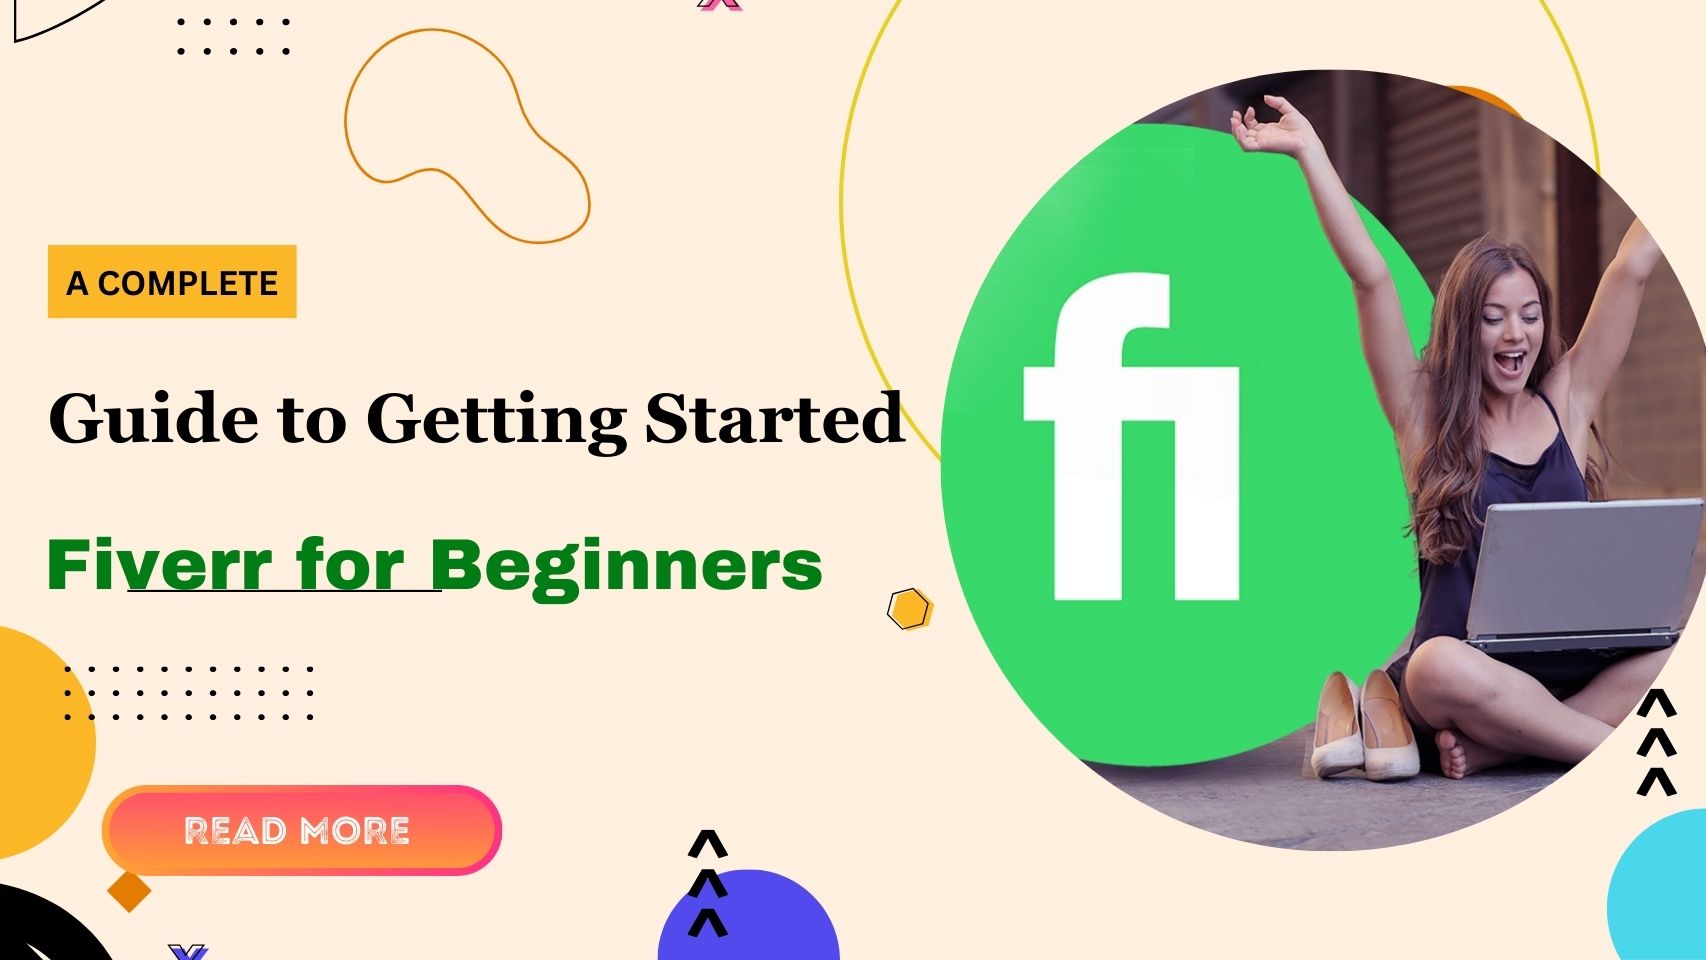 Fiverr for Beginners: A Complete Guide to Getting Started